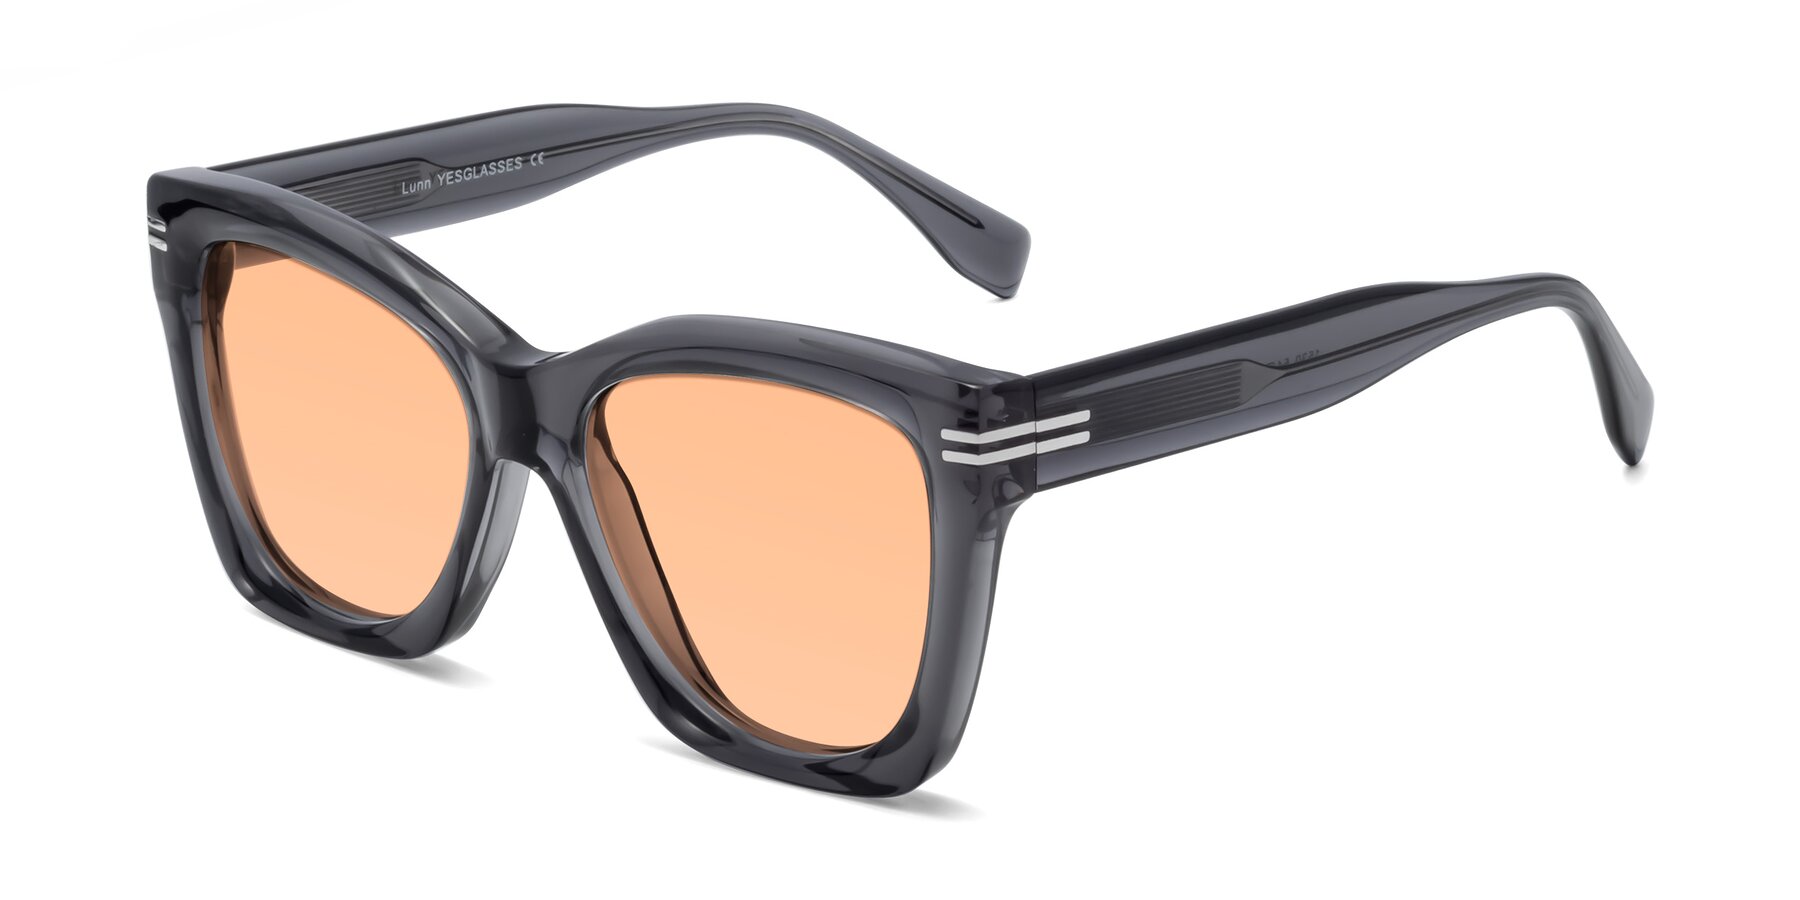 Angle of Lunn in Translucent Gray with Light Orange Tinted Lenses